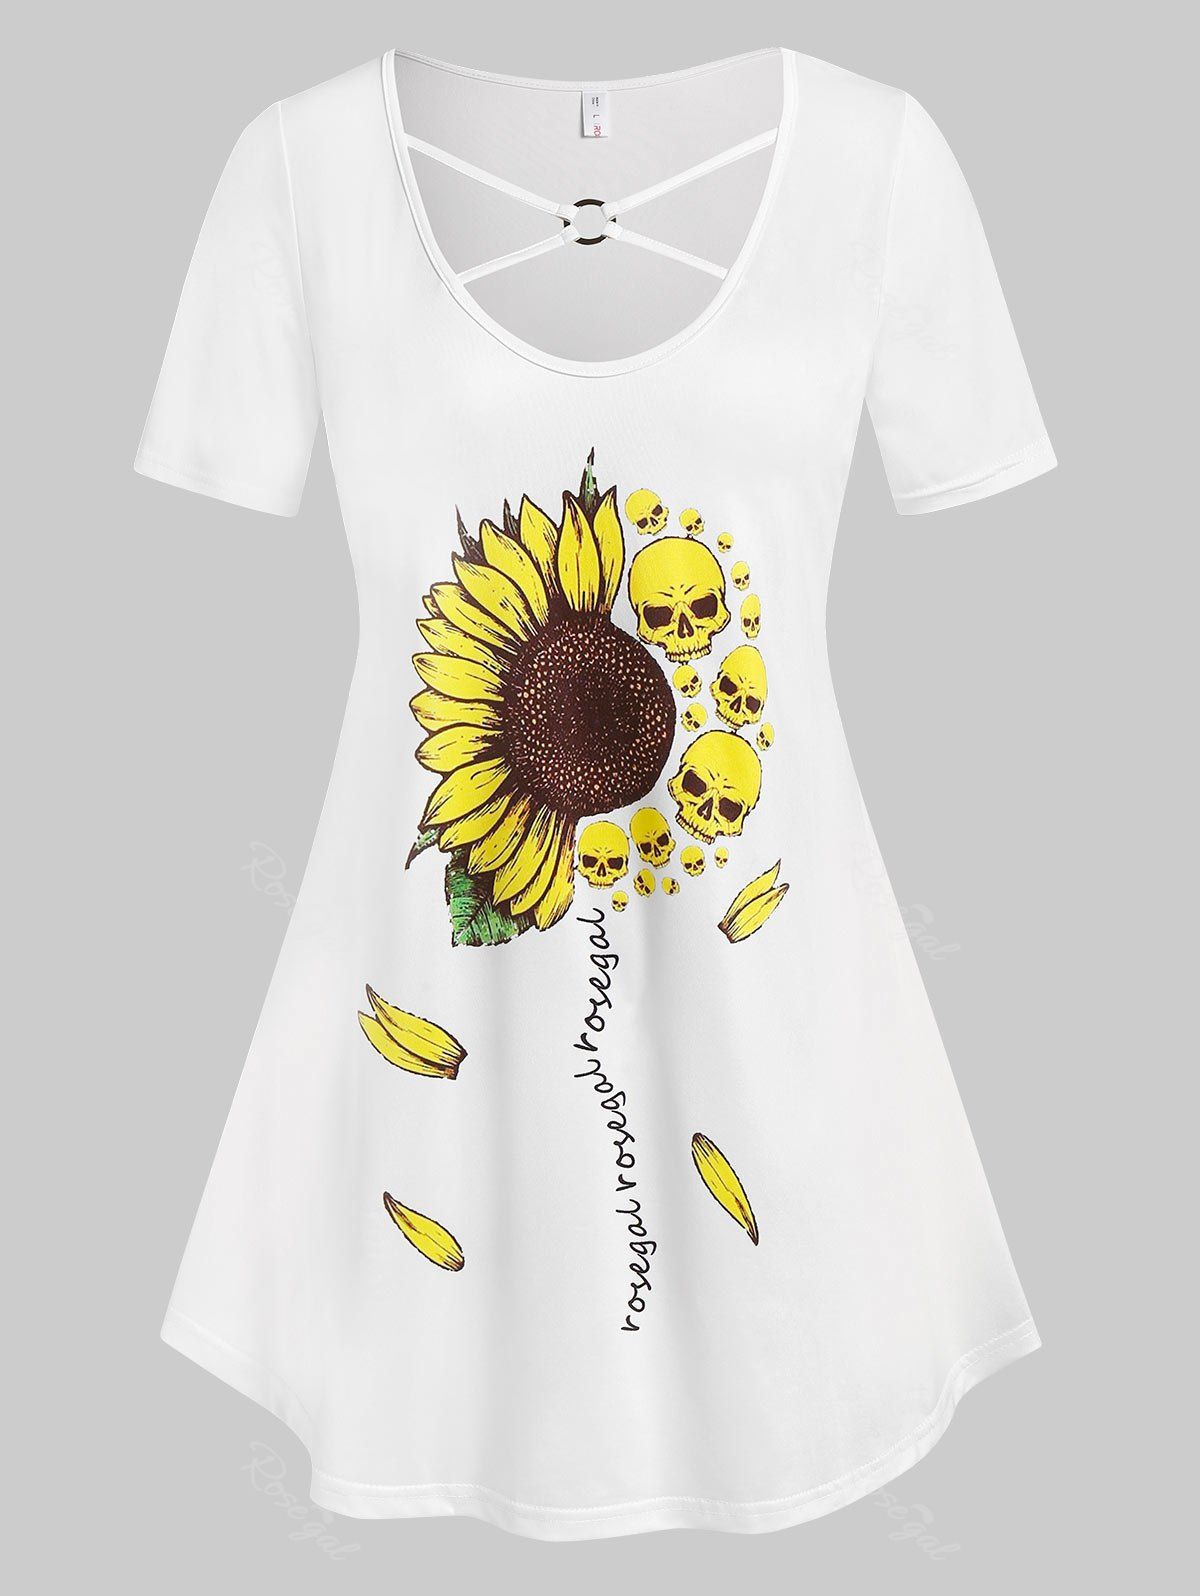 Fancy Plus Size O Ring Sunflower Skull Print Graphic Tee  